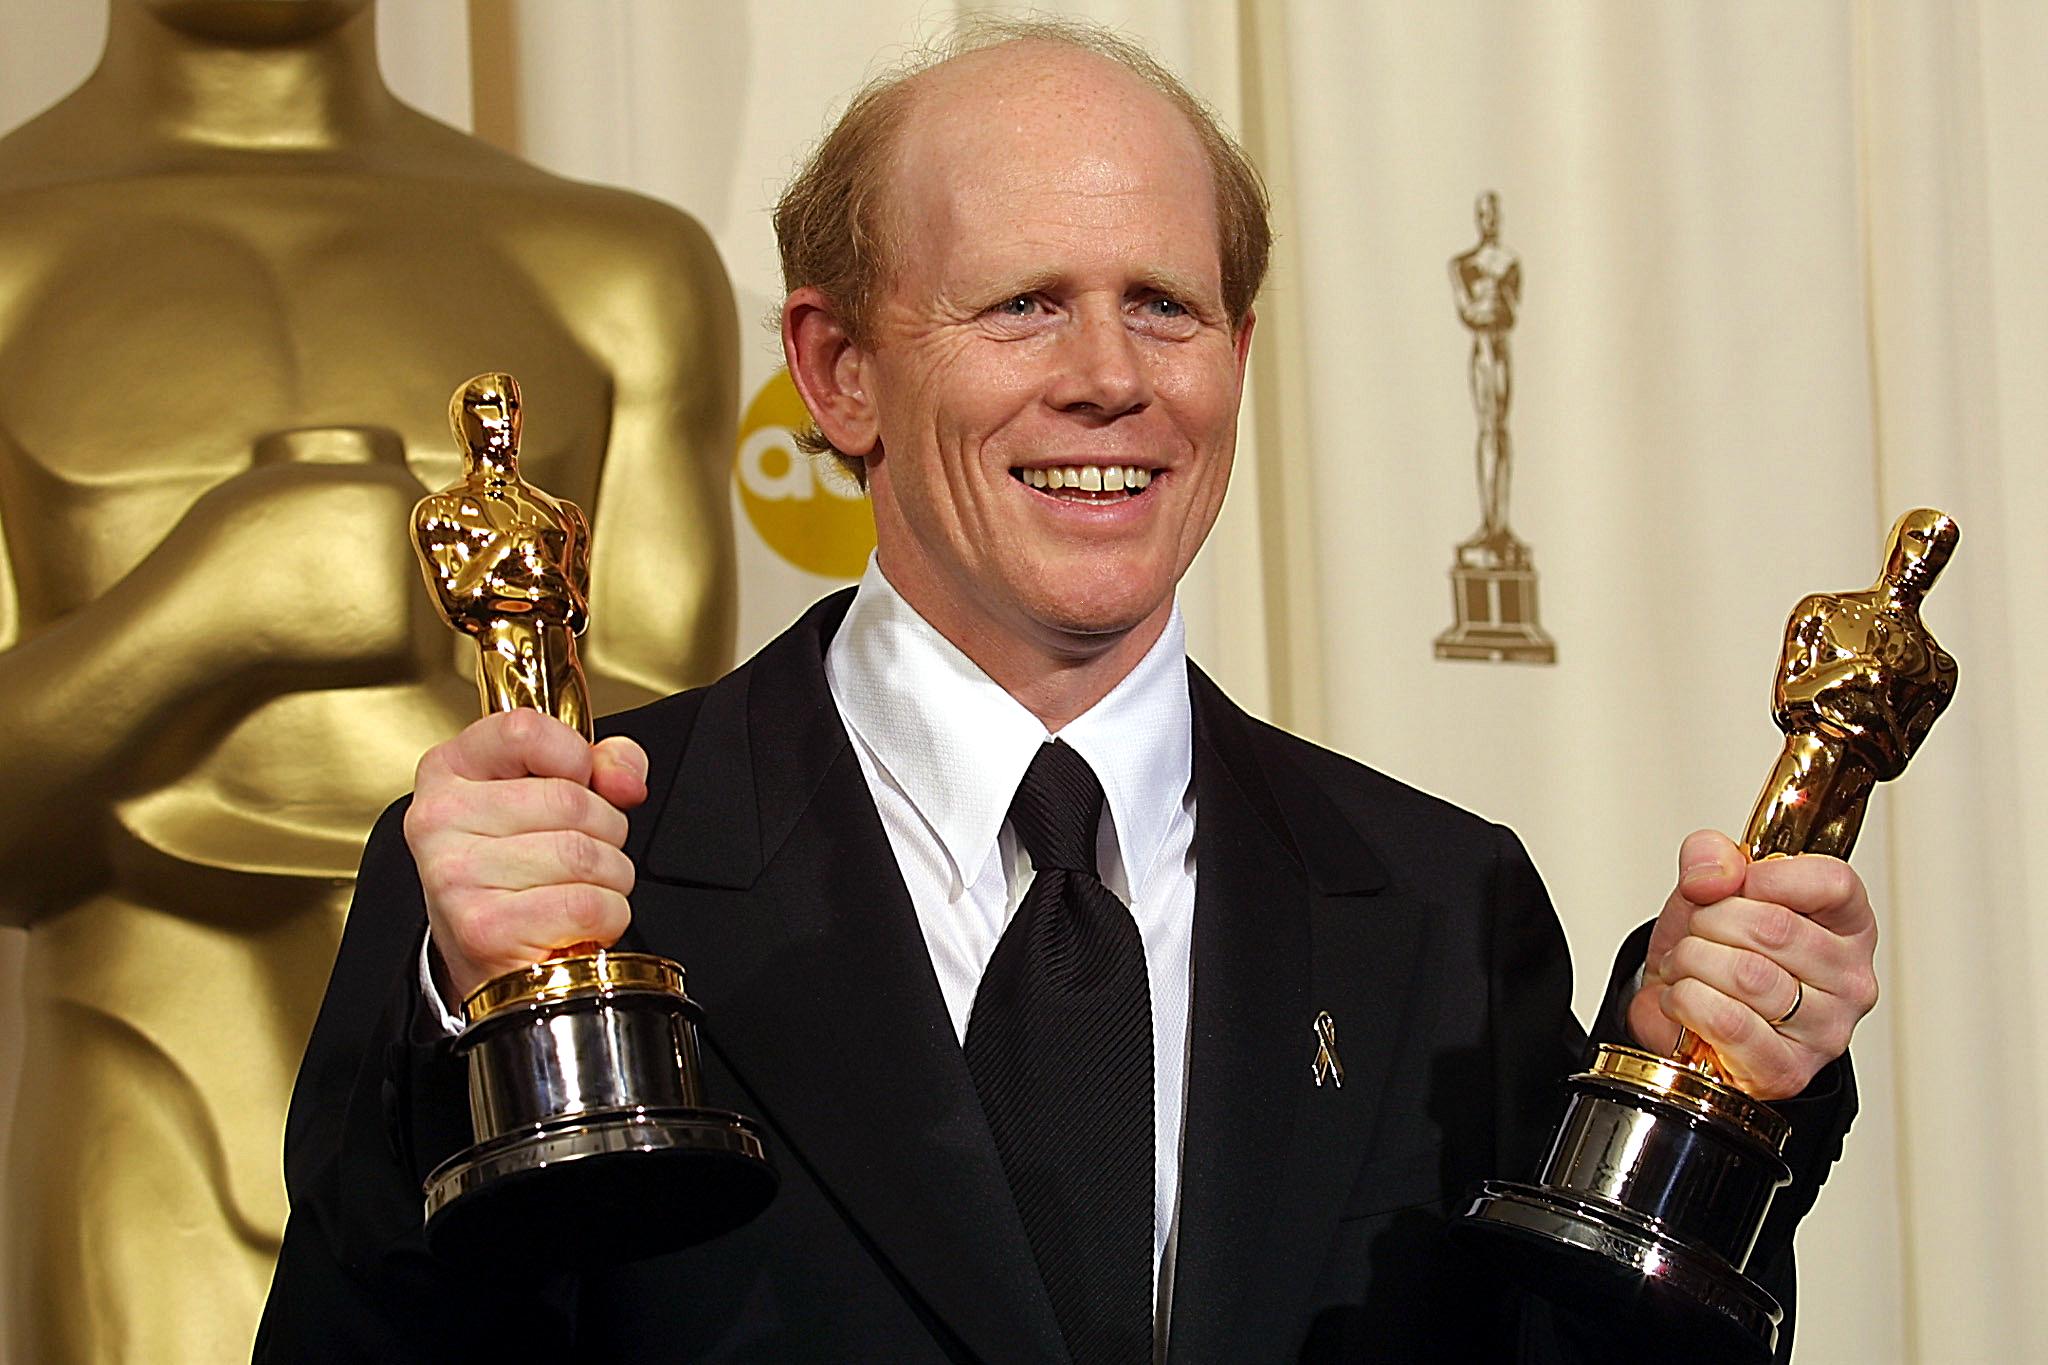 Ron Howard is one of the richest Hollywood directors